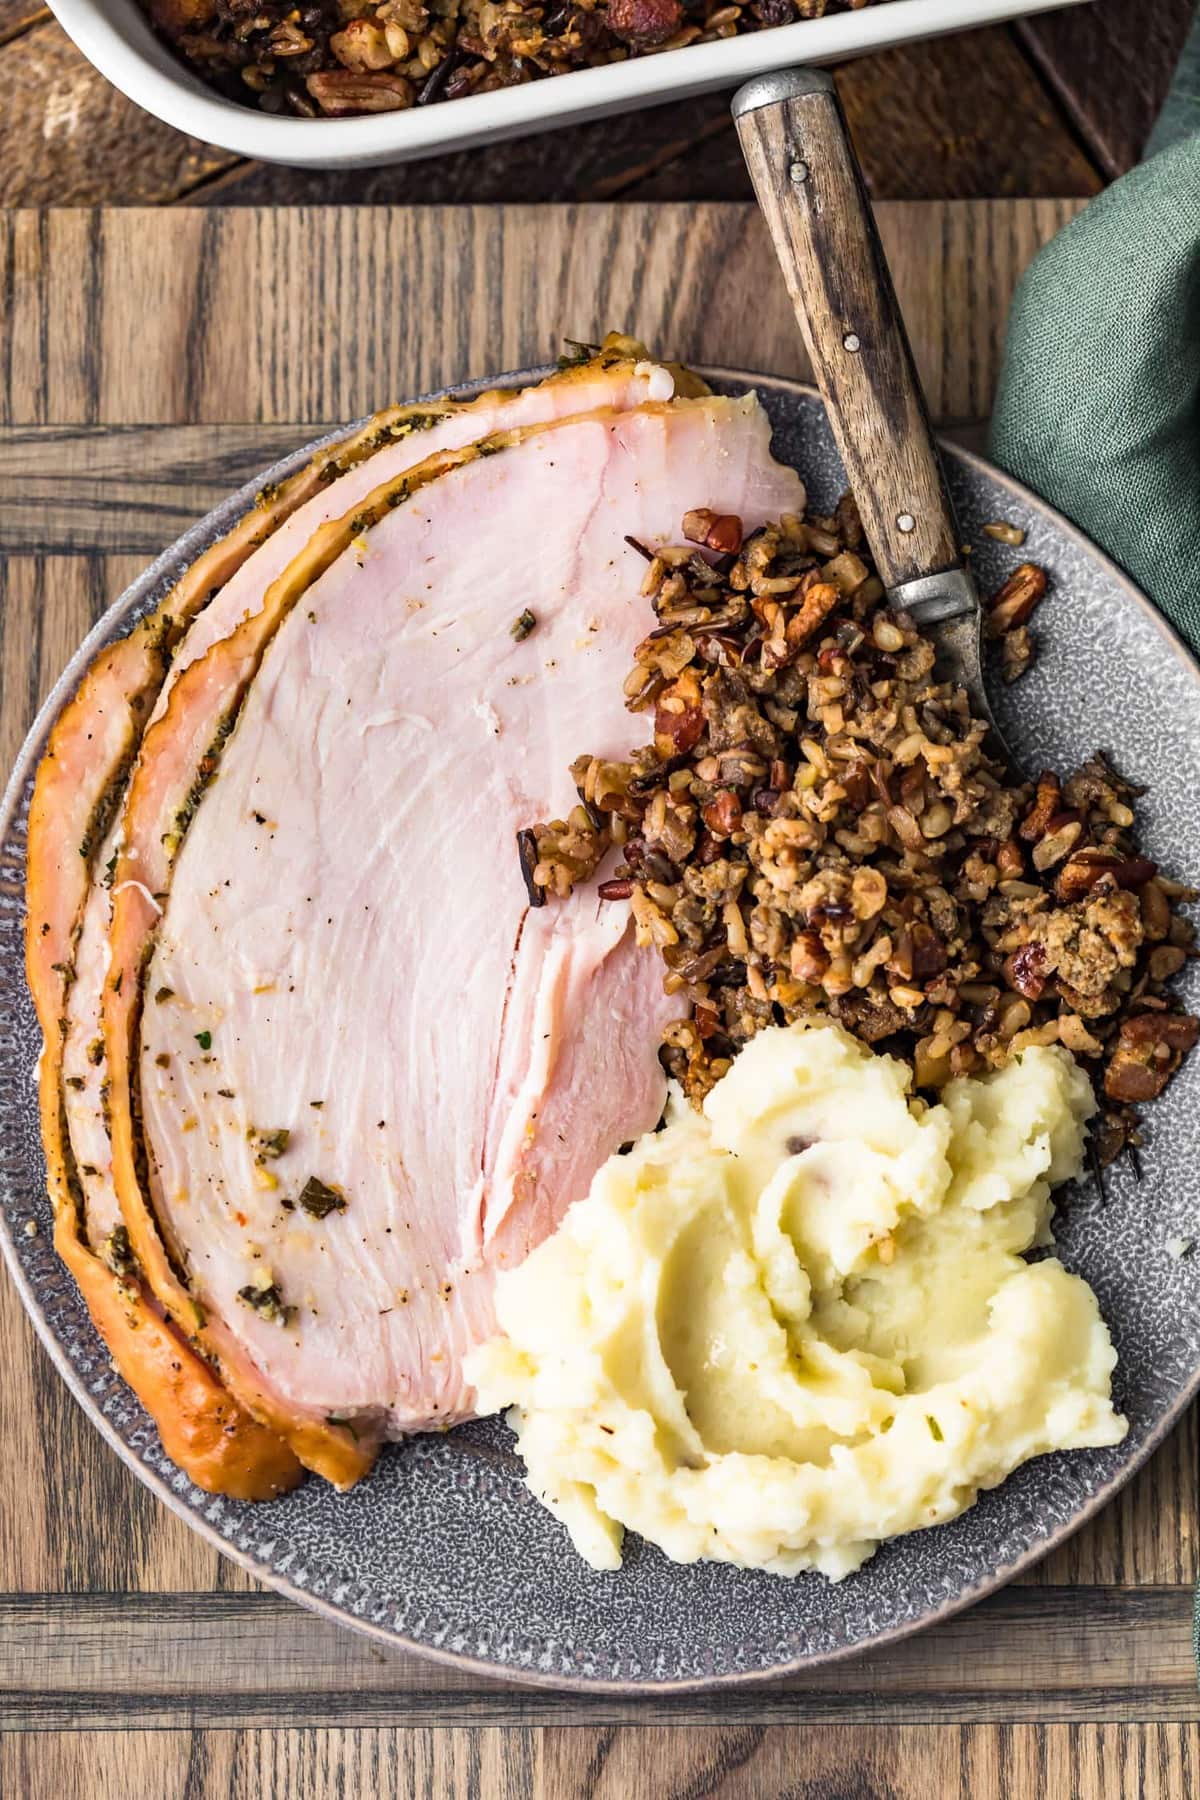 Two slices of smoked turkey breast served with stuffing an potato